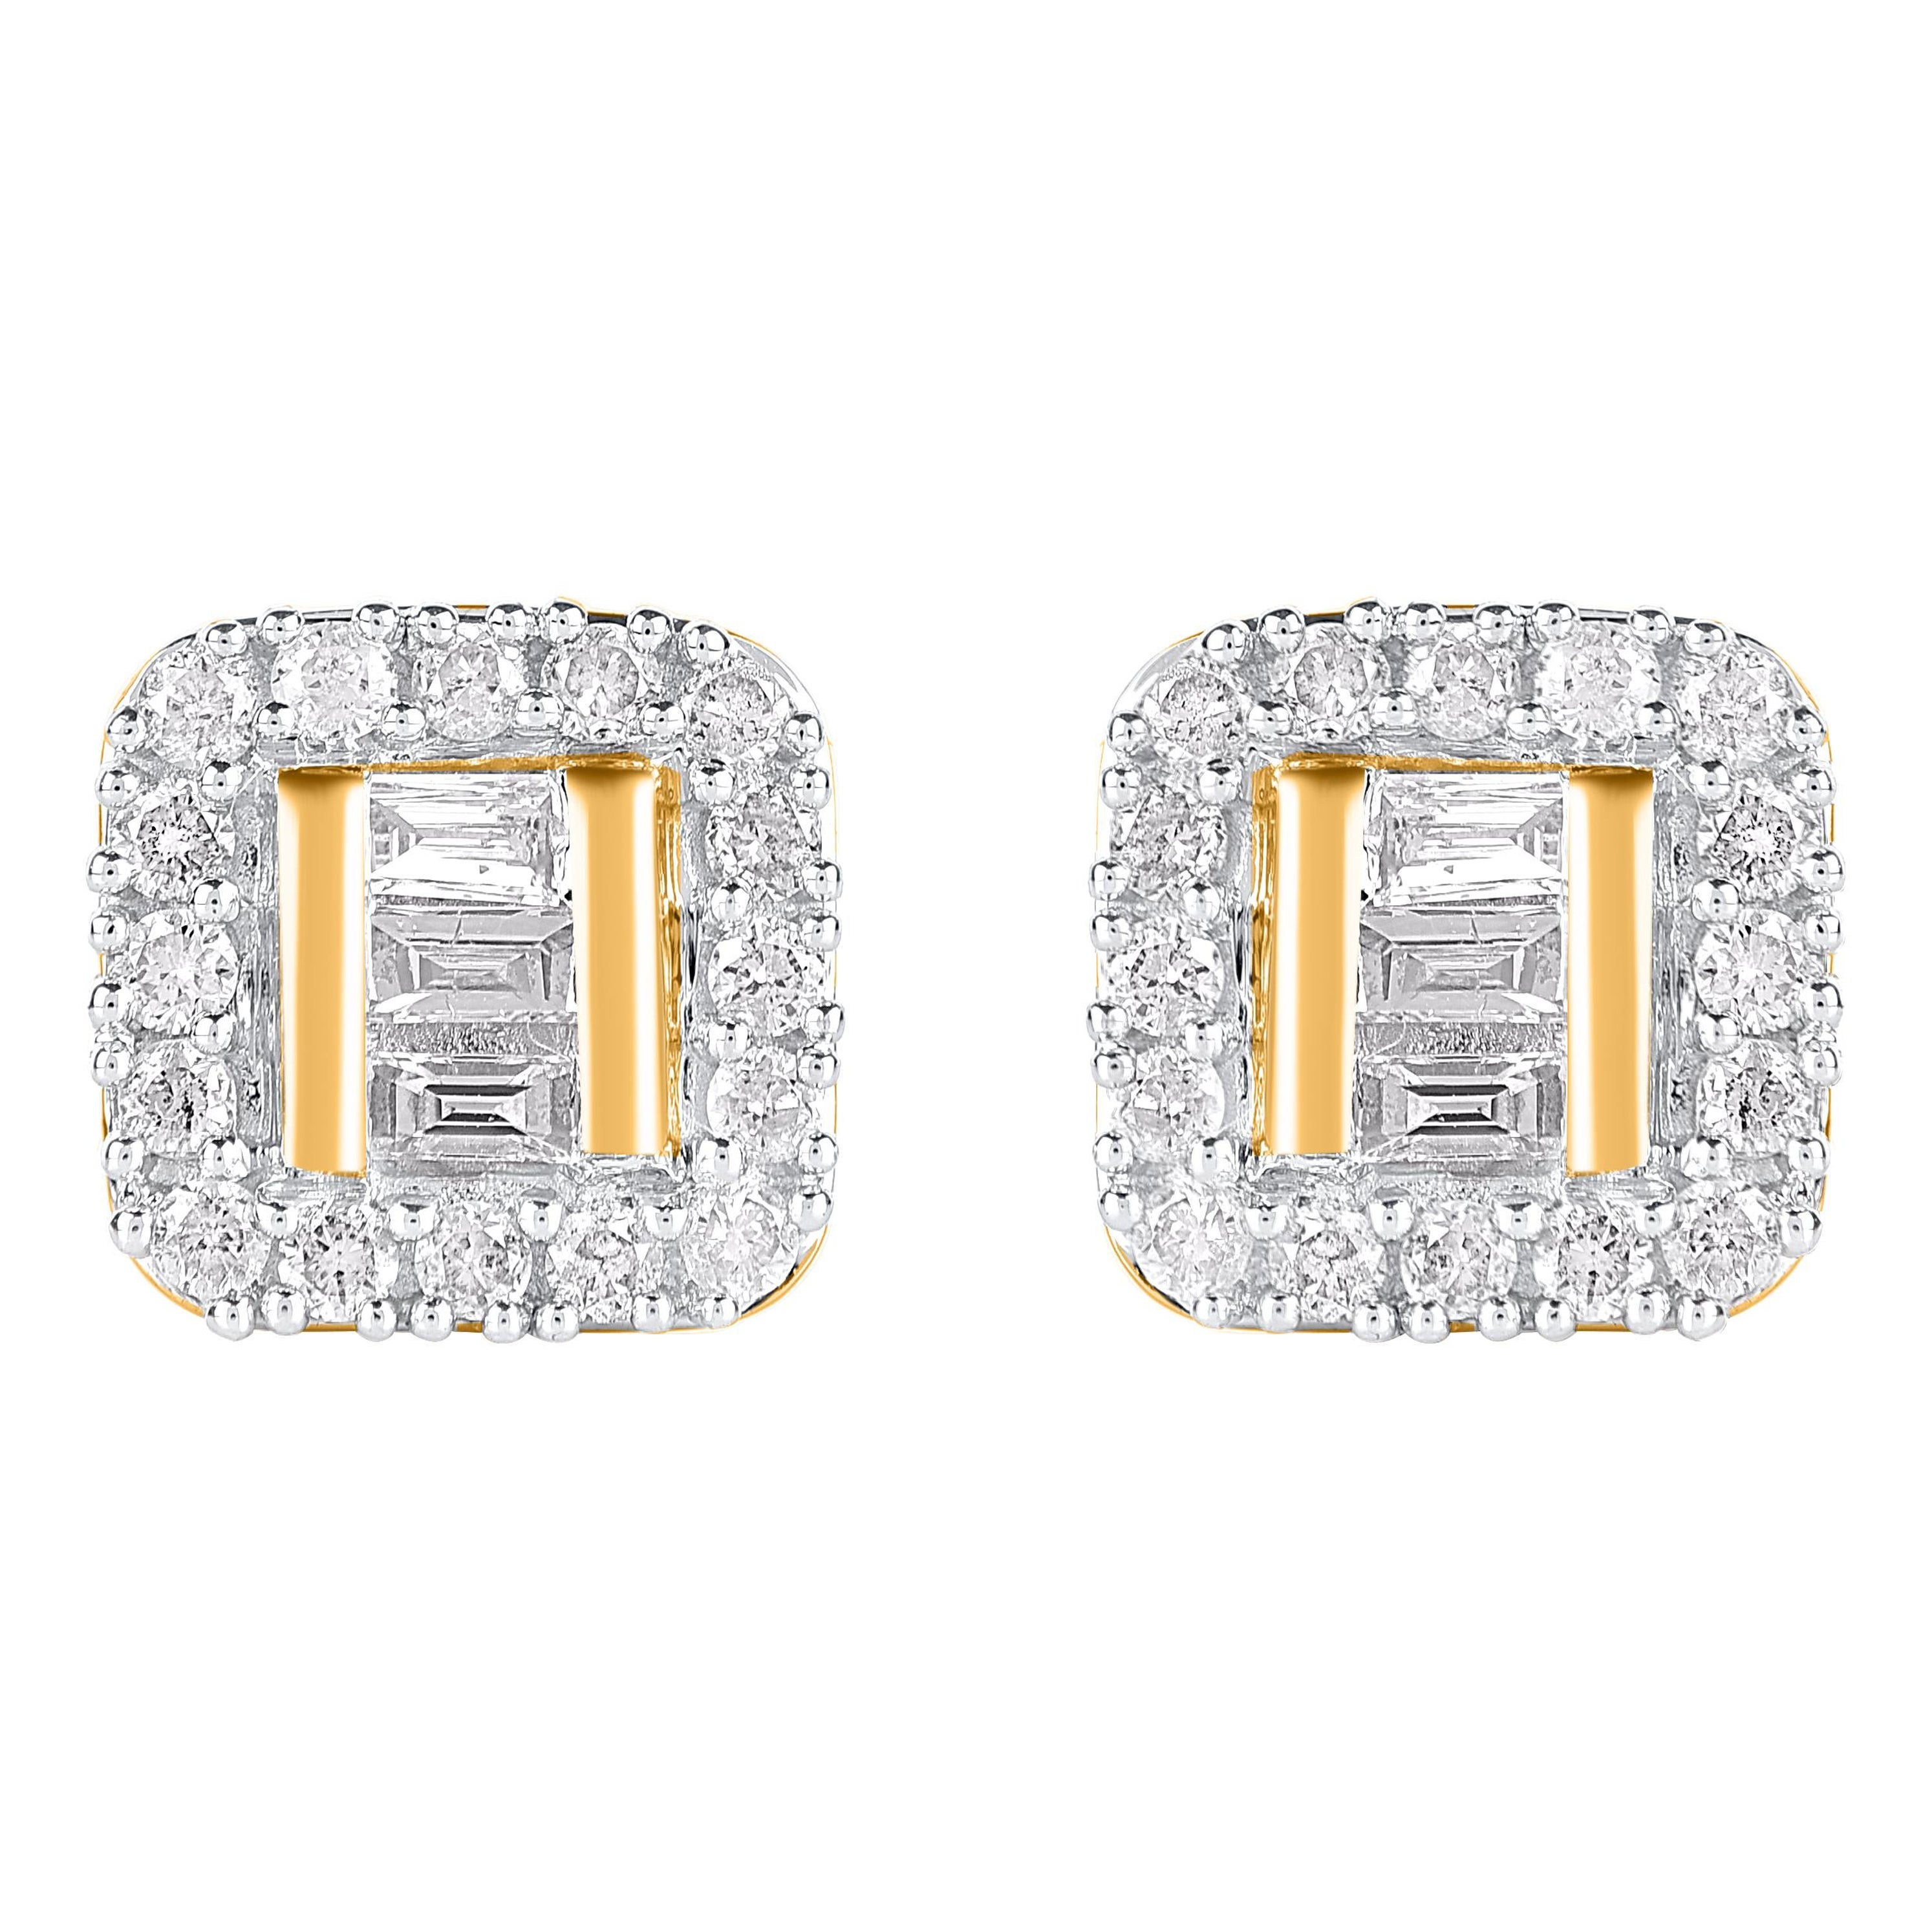 TJD 0.25 Carat Baguette and Round Diamond 14KT Yellow Gold Halo stud earrings